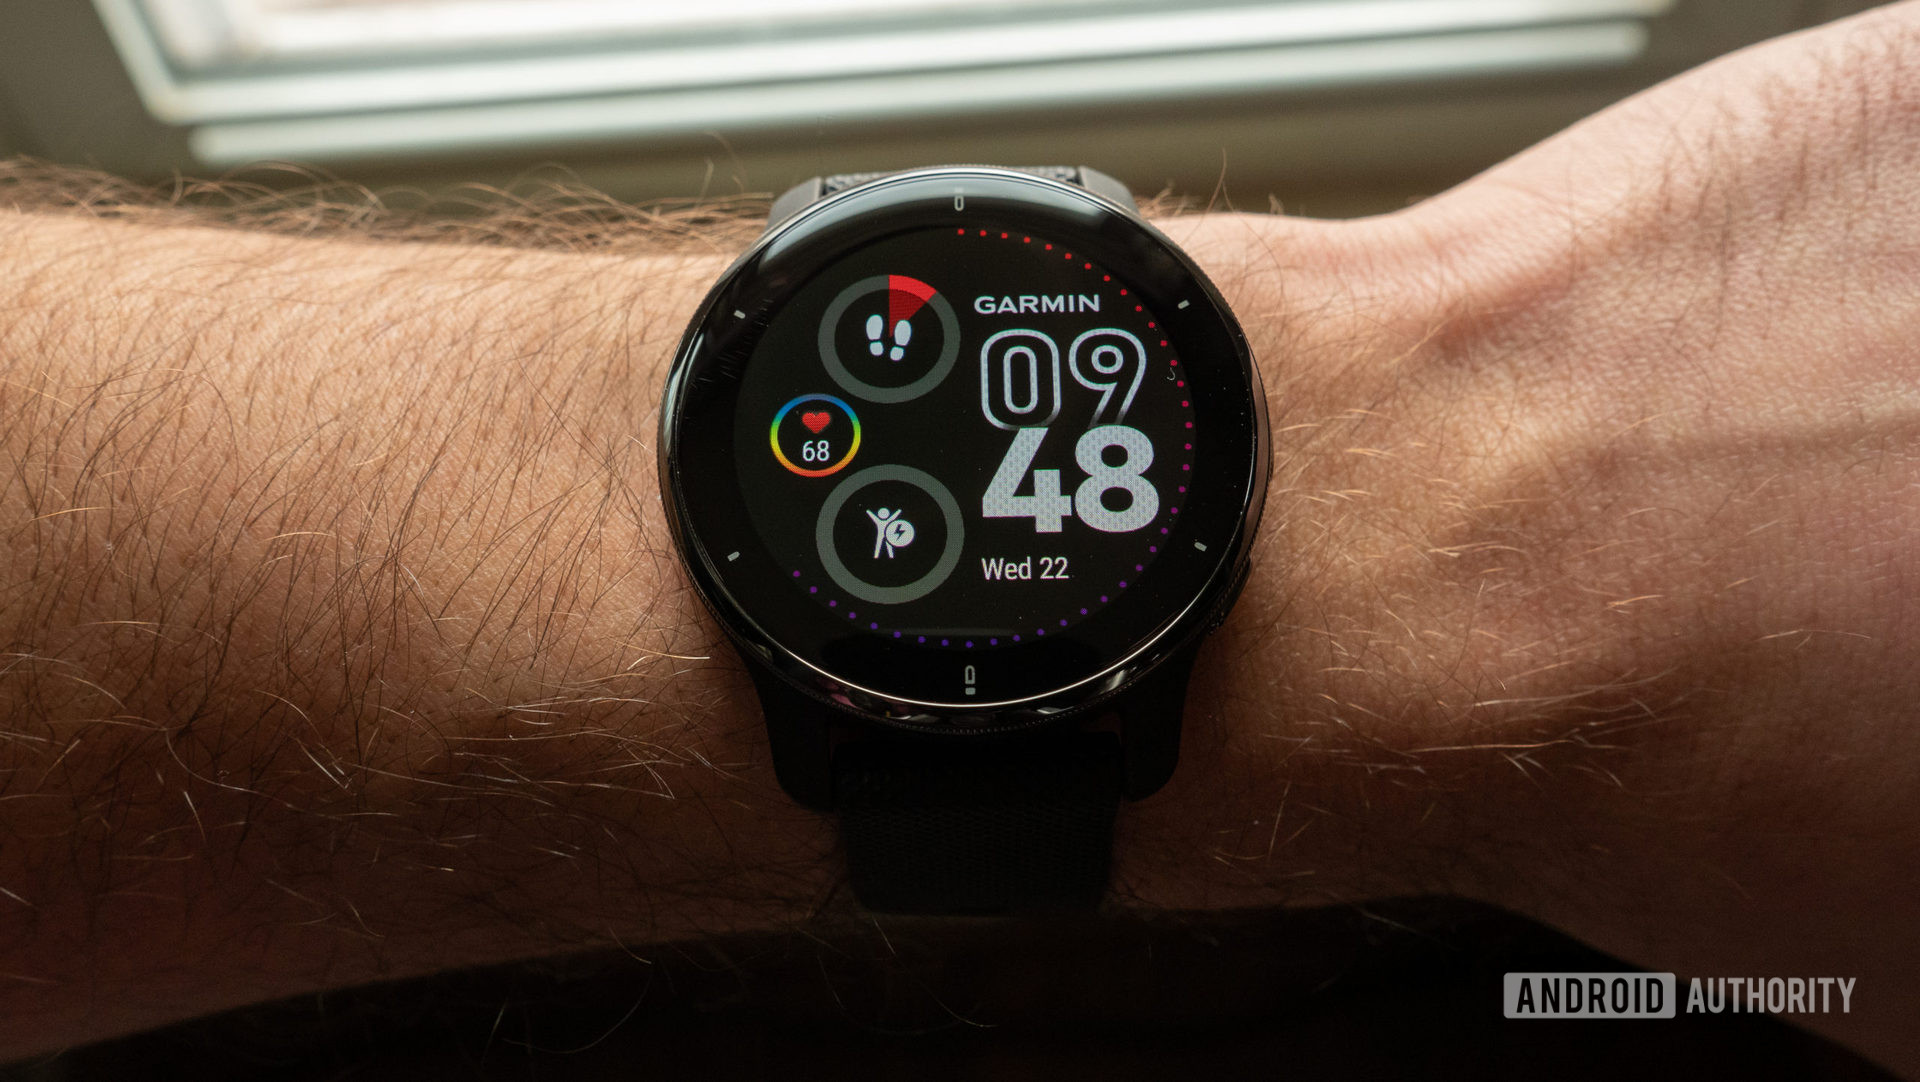 Garmin Venu2 Plus on the wrist, showing the clock face and display